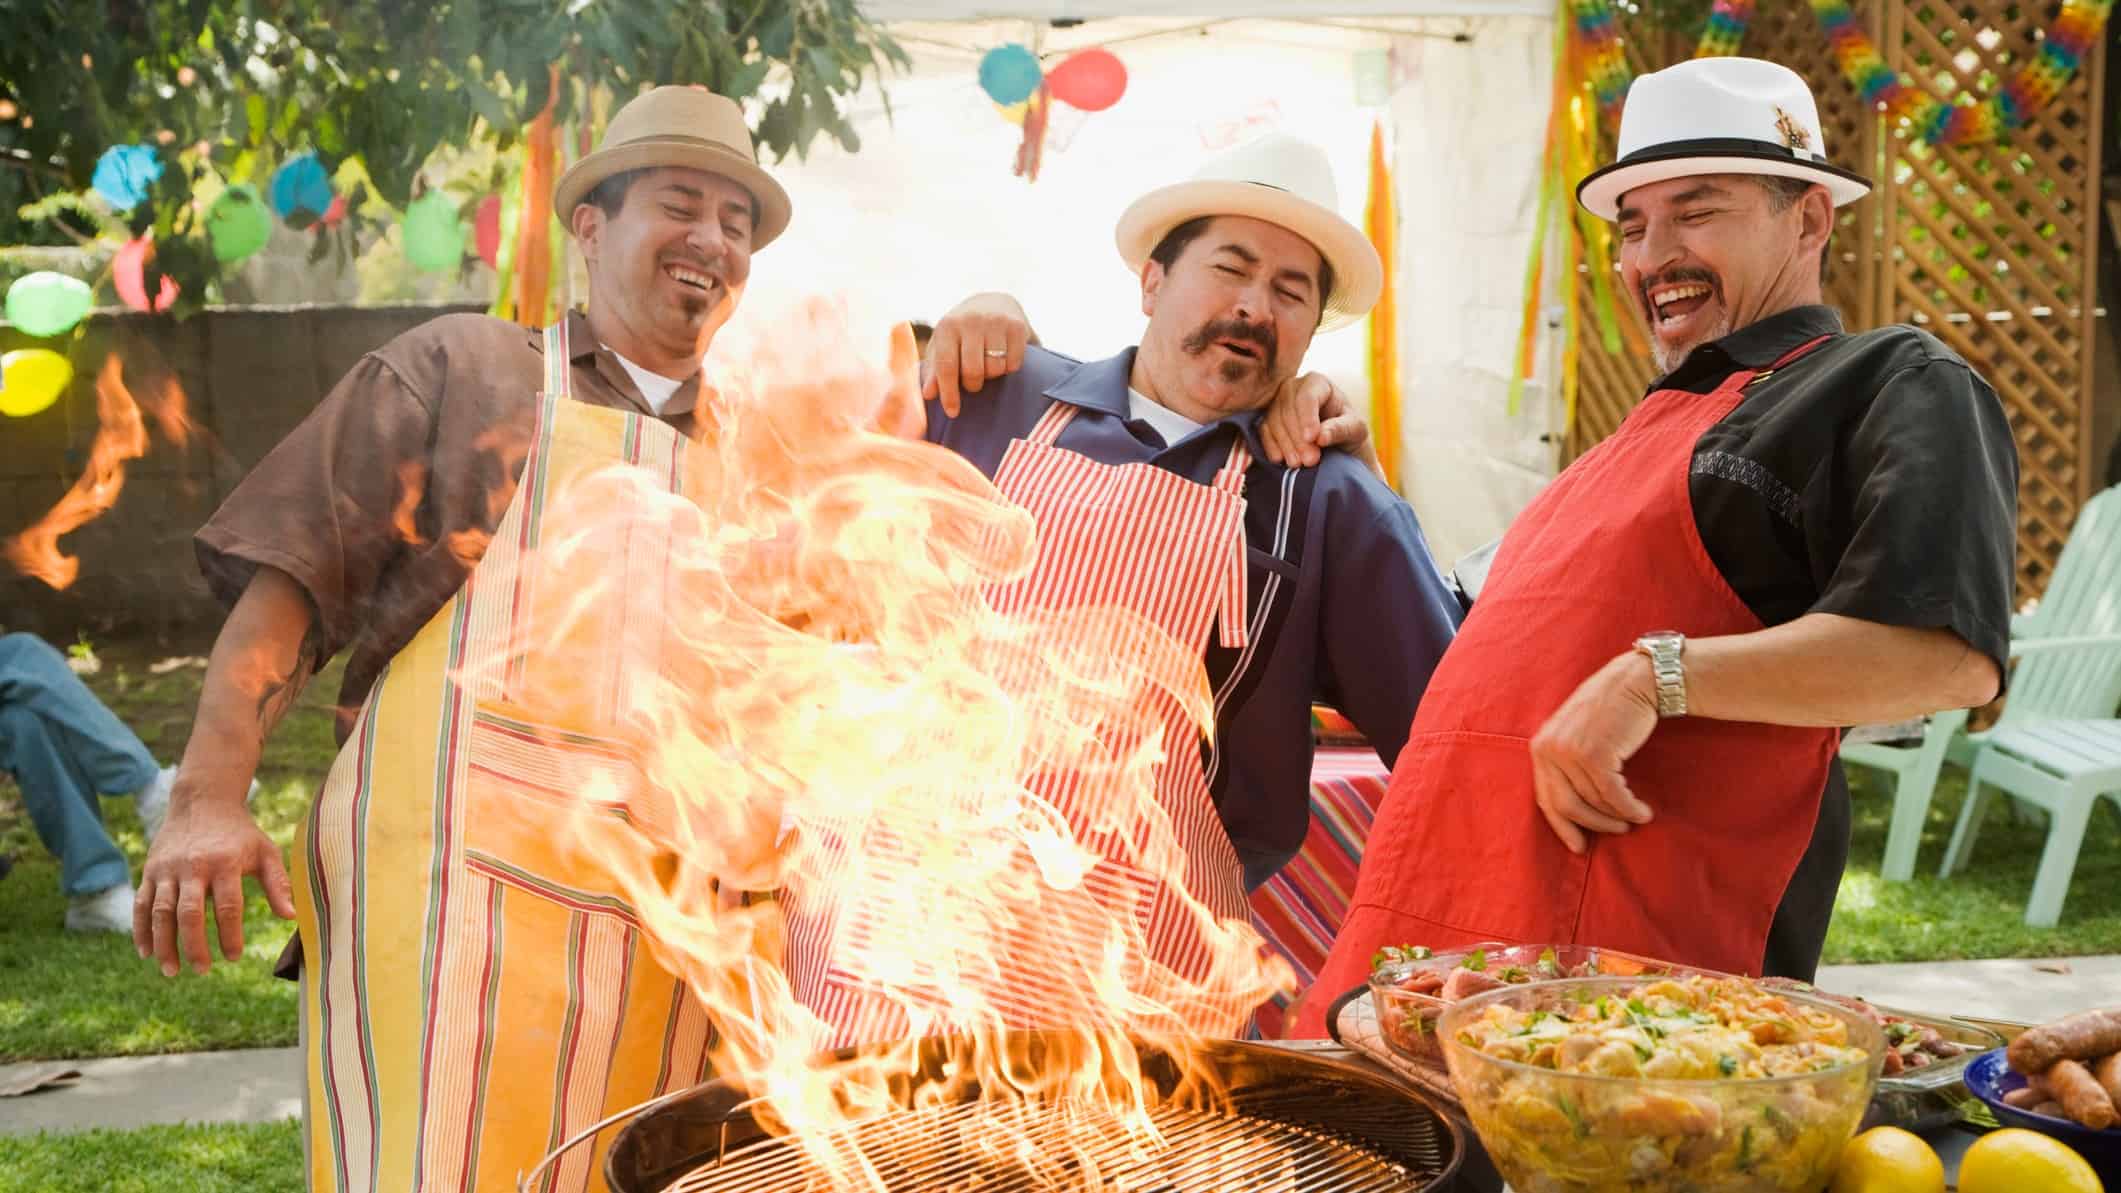 Three happy men with moustaches cooking on a BBQ with flames leaping up.